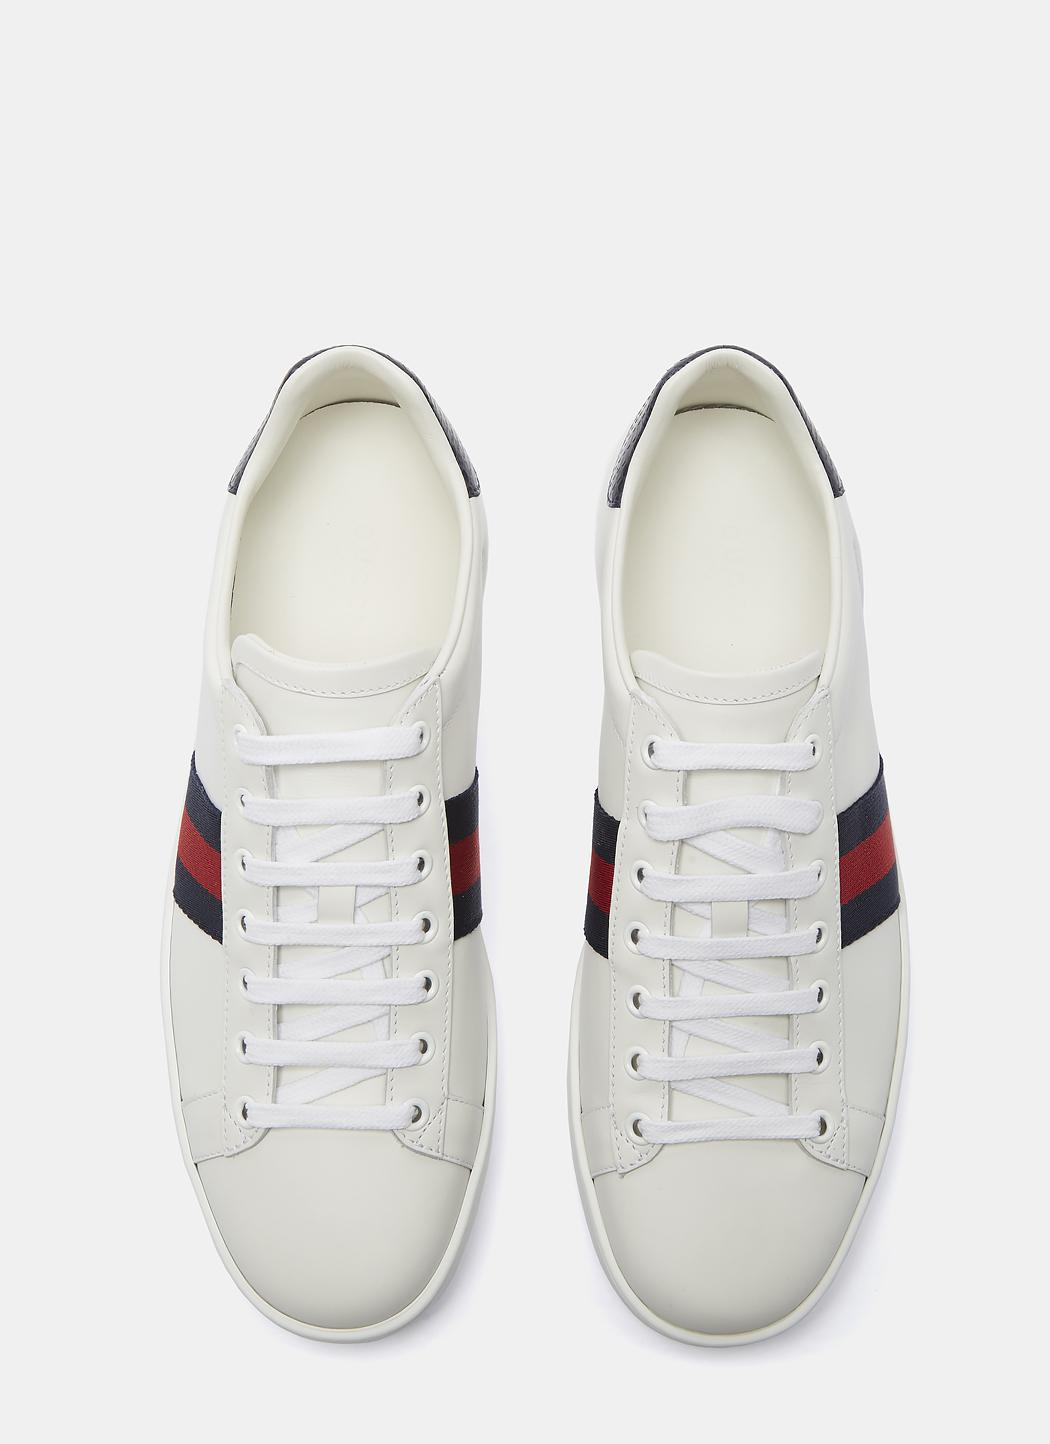 Lyst - Gucci Women's Ace Leather Low-top Leather Sneakers In White in White